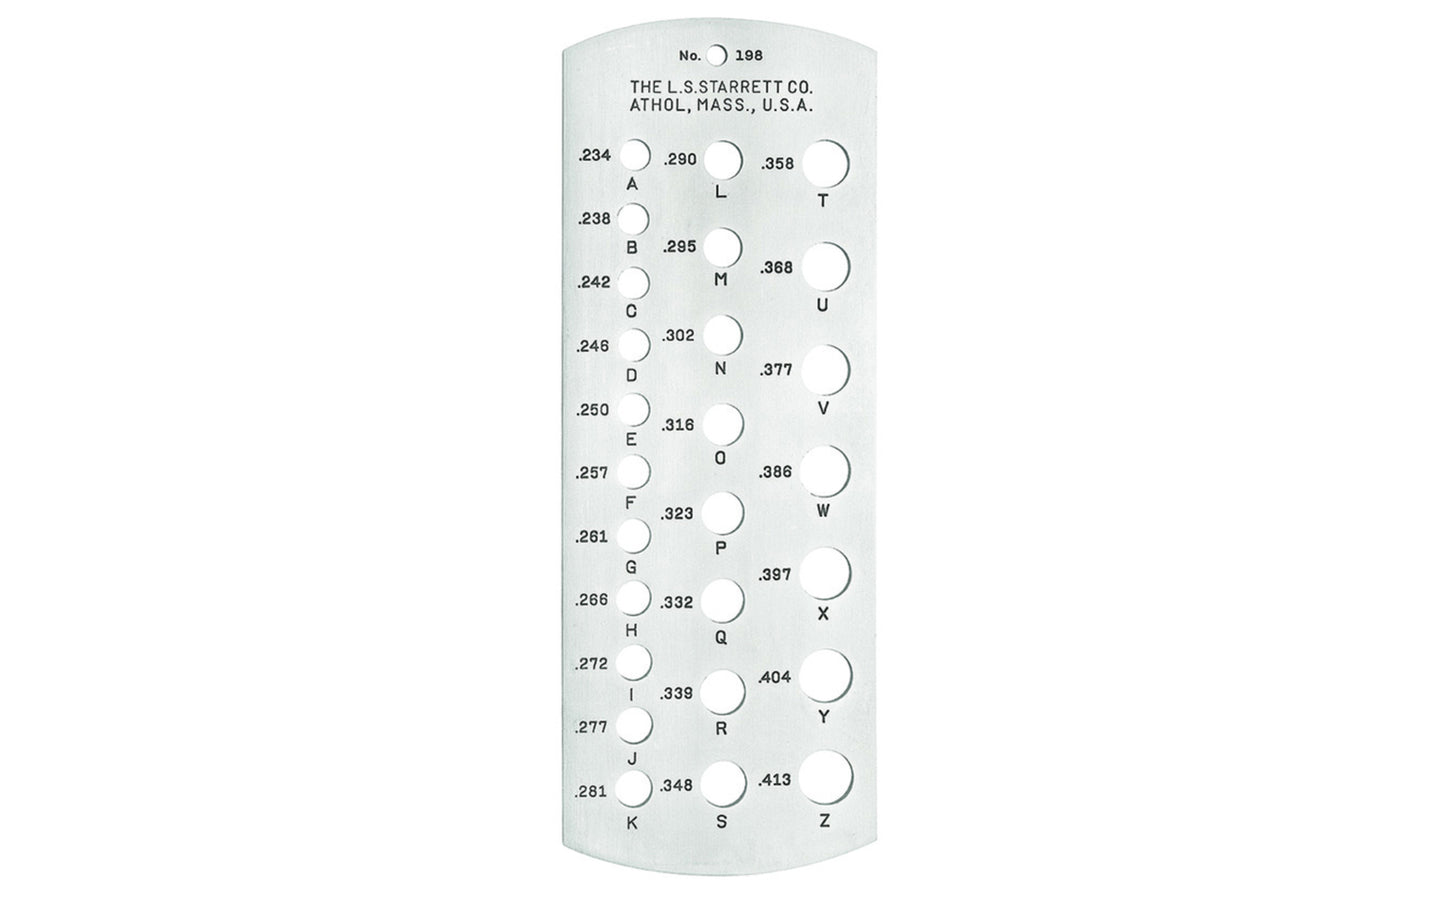 198 Standard Letter Size Drill Gage provides quick, convenient checking of letter size drills. Twenty-six holes are provided, giving corresponding drill sizes from A through Z - with decimal equivalents from .234" diameter through .413" diameter.  Made in USA.